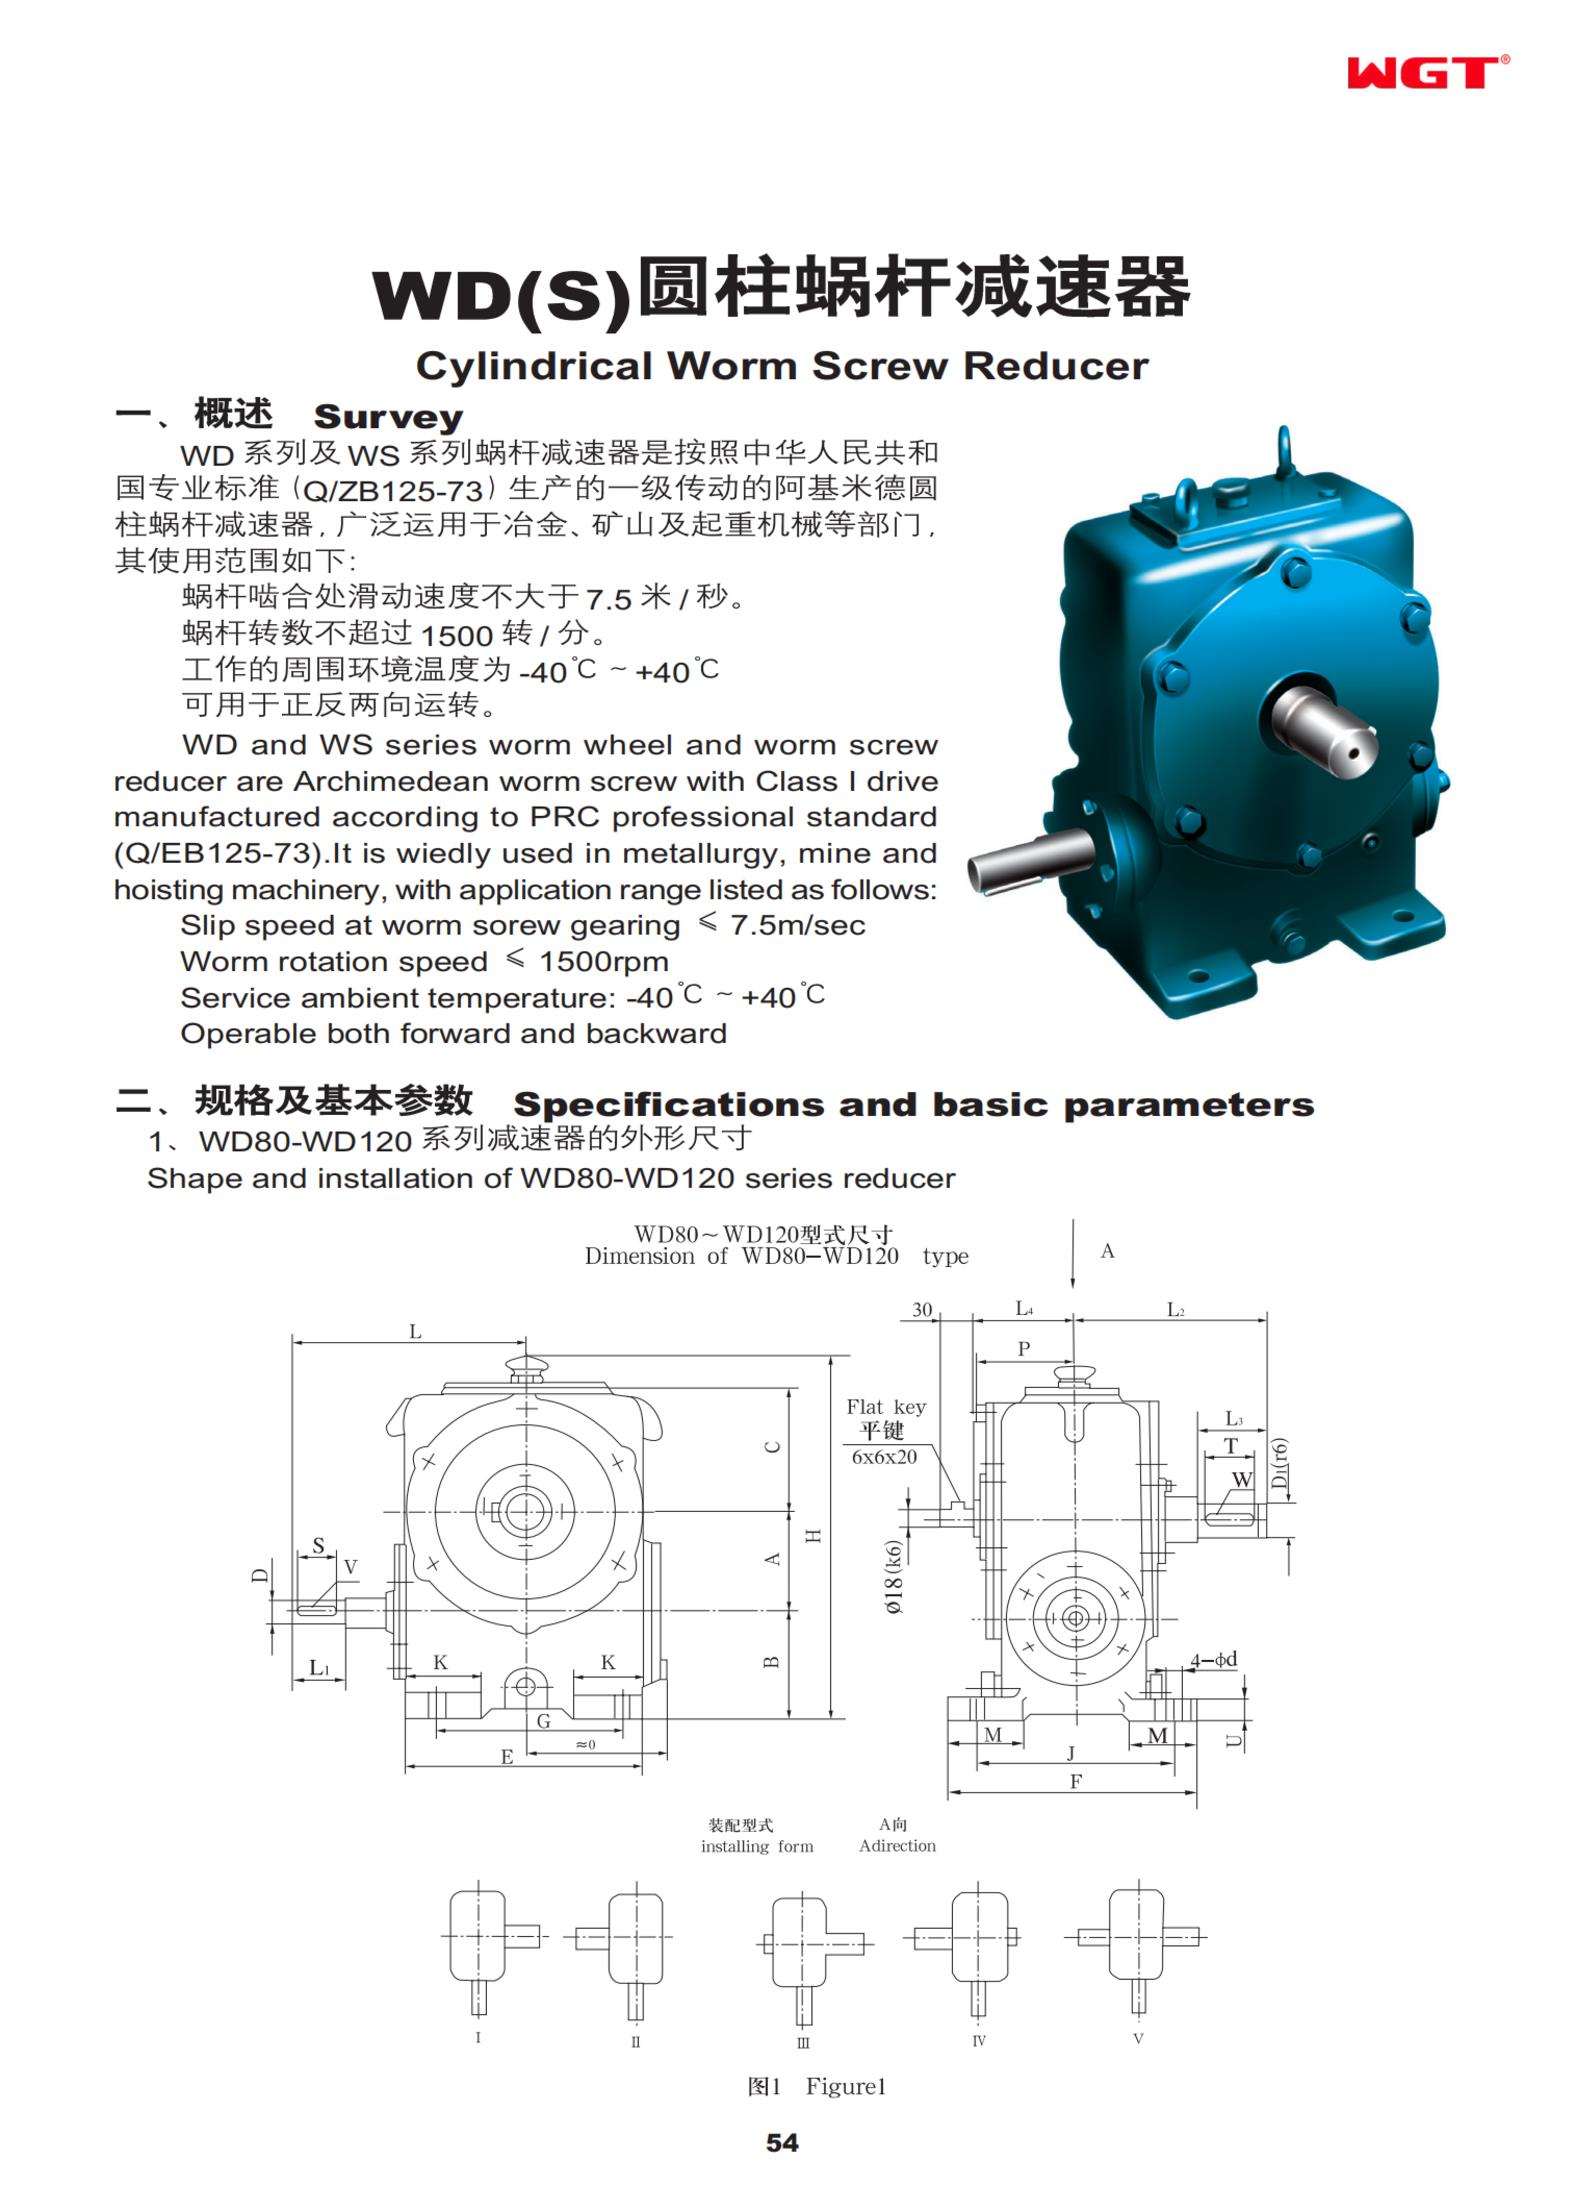 WD300 cylindrical worm reducer WGT